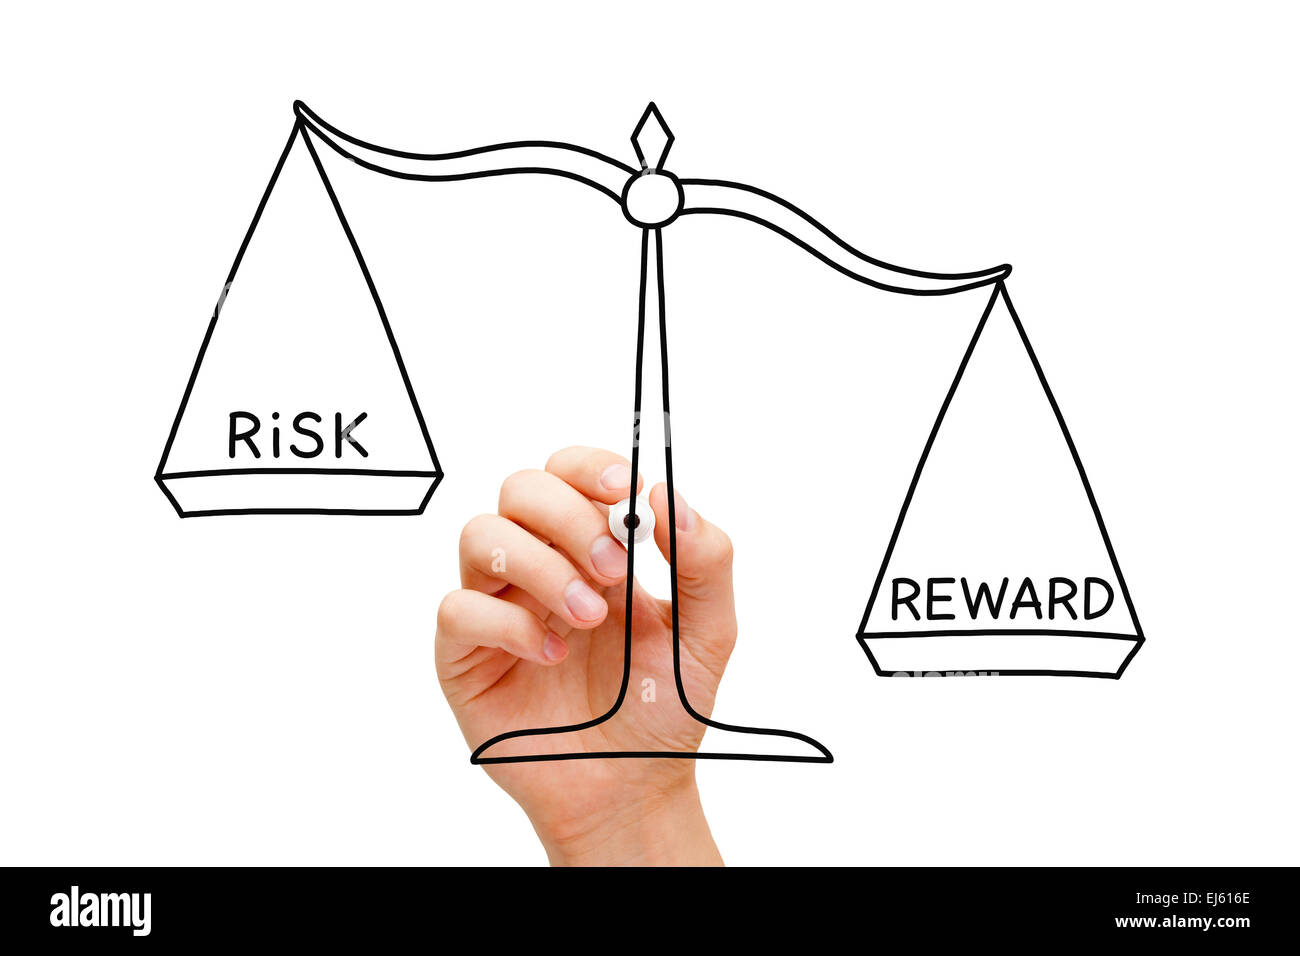 Hand drawing Risk Reward scale concept with black marker on transparent wipe board isolated on white. Stock Photo